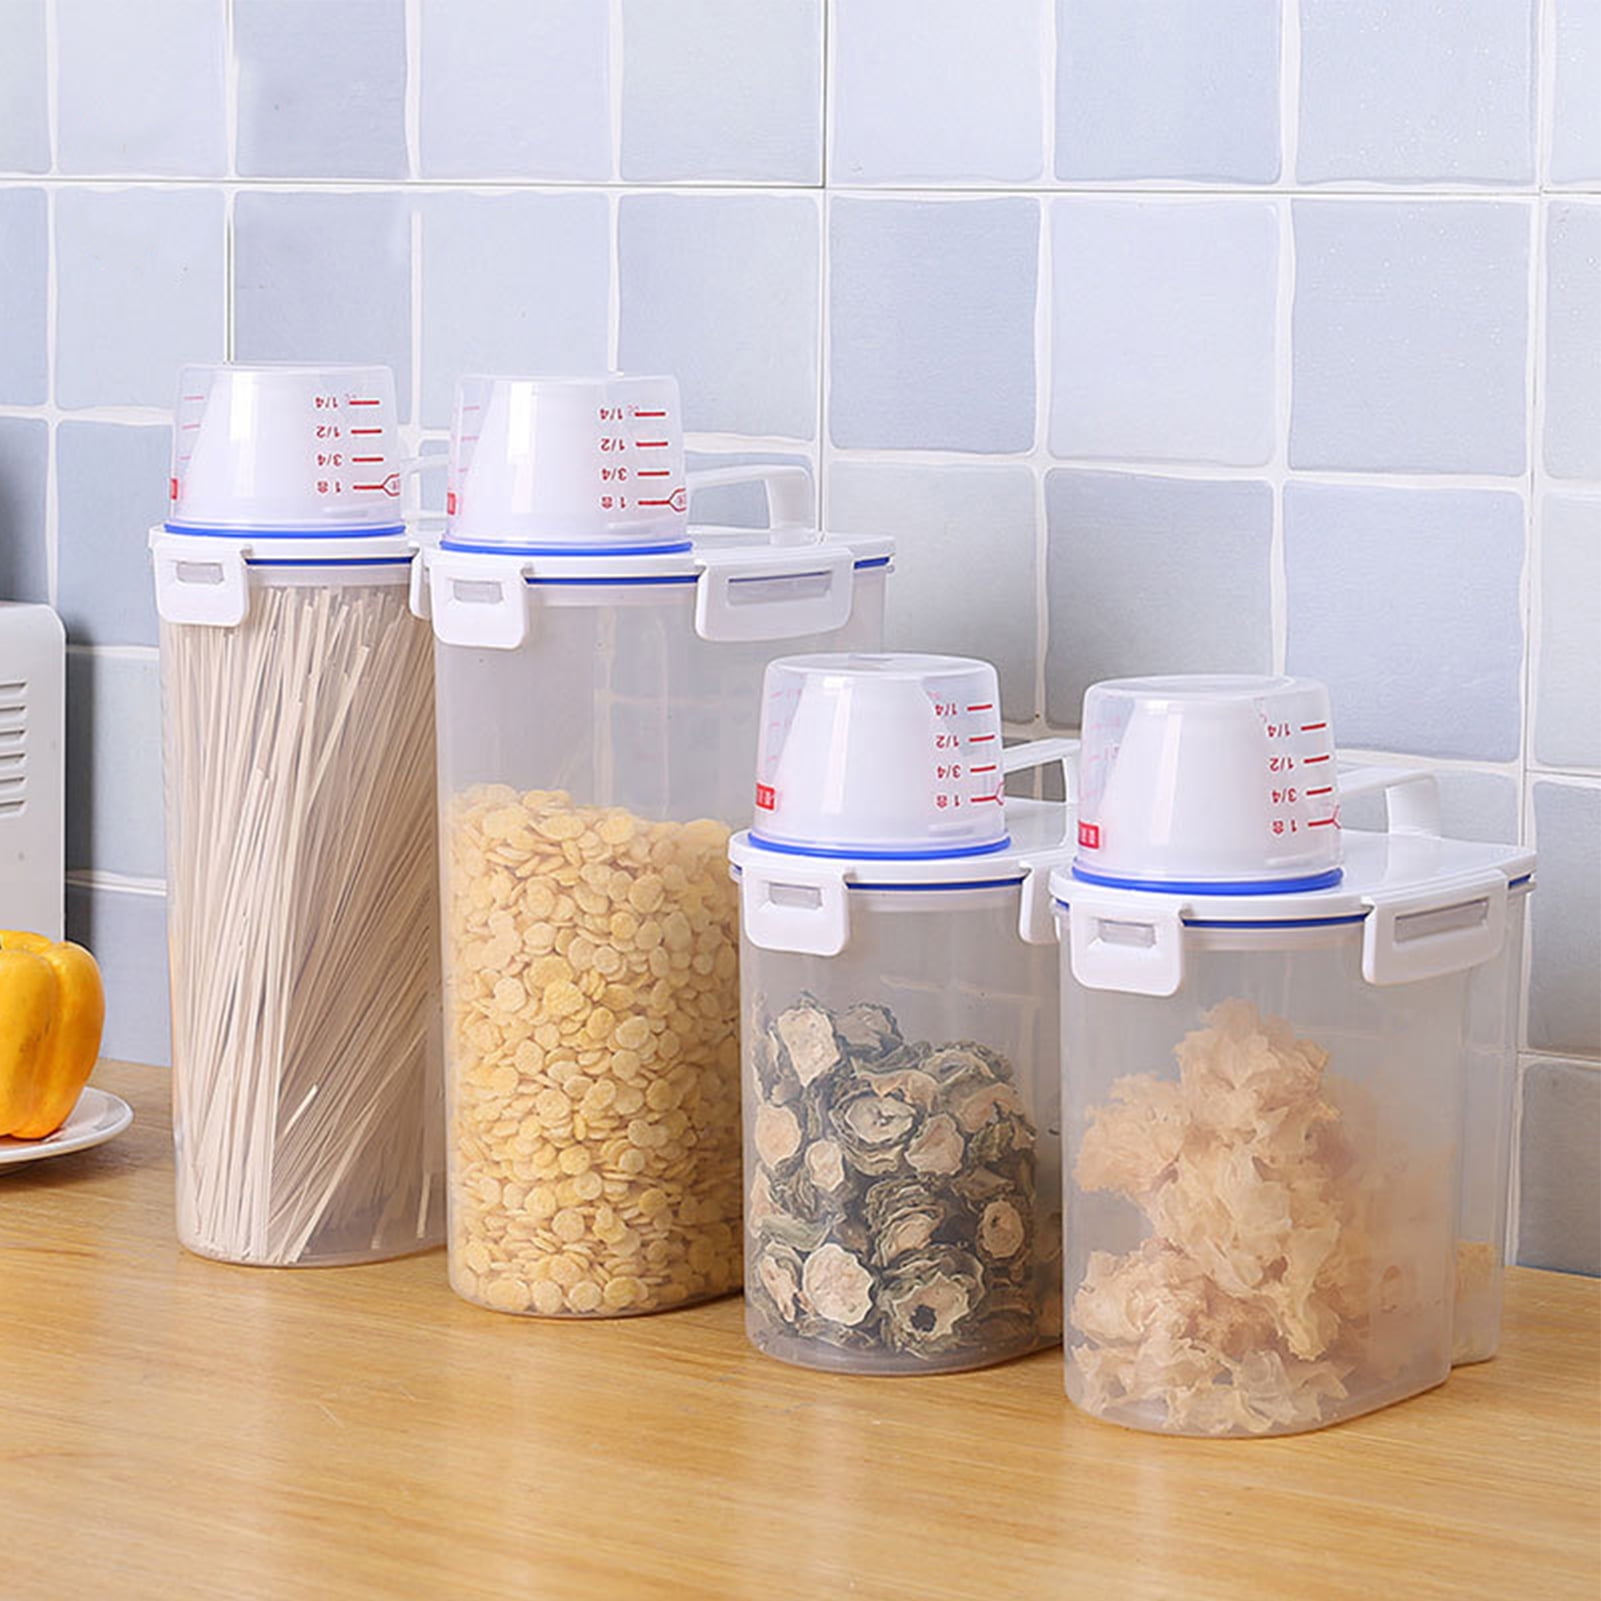 Vikakiooze Large Airtight Rice Container, Food Storage Cereal Container,  Food Container With Measuring Cup, Flour Grain Container For Household